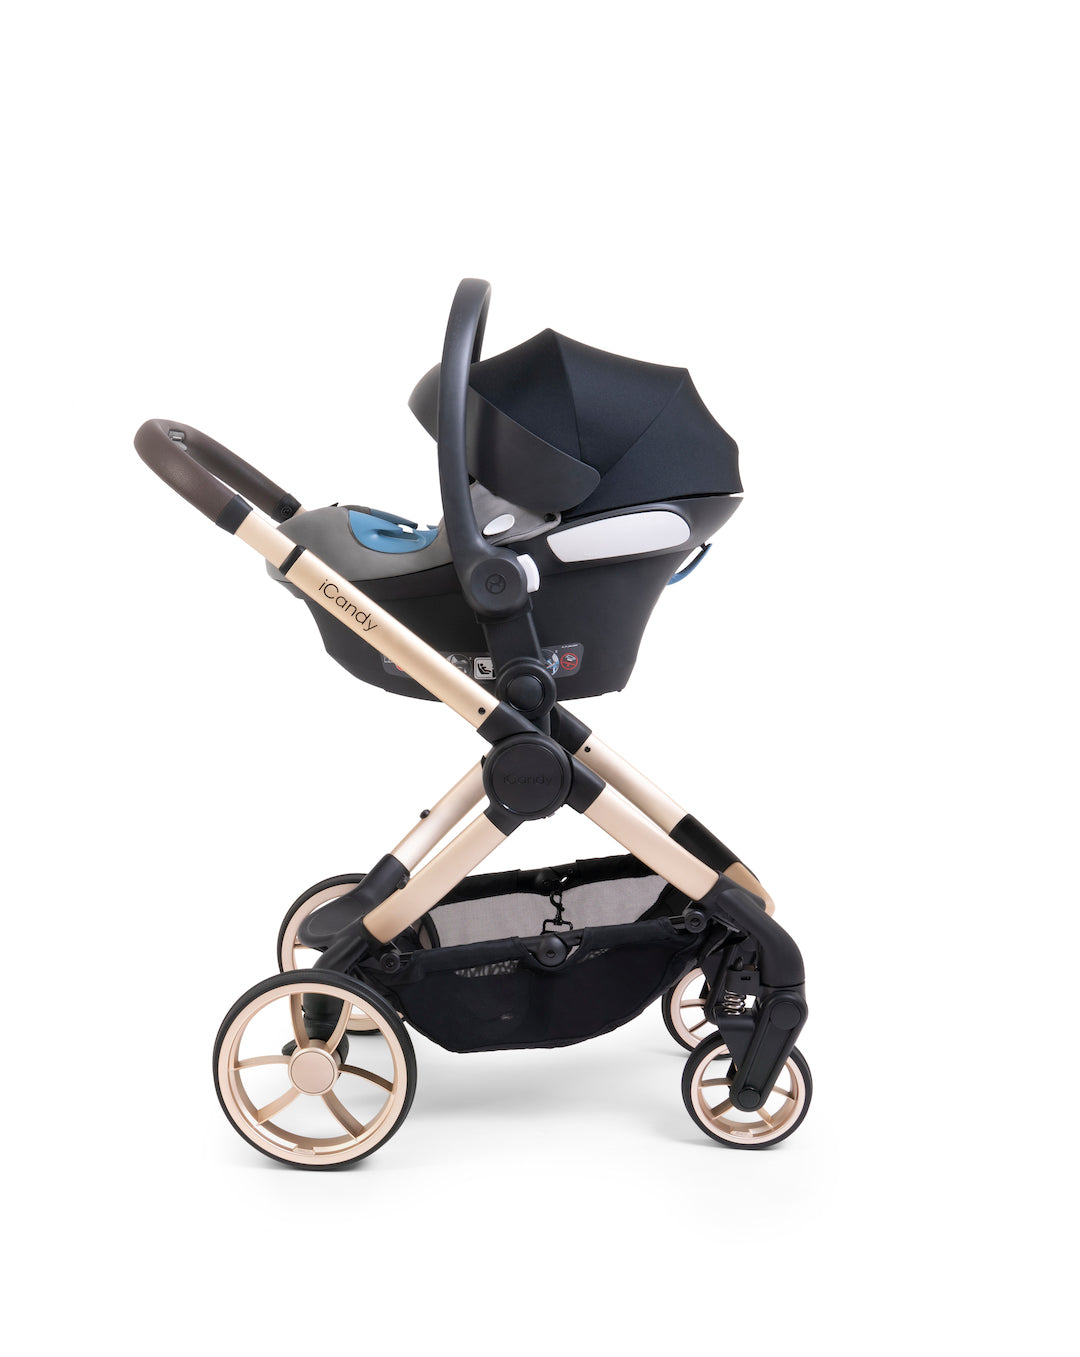 iCandy Peach 7 Pushchair & Cybex Cloud T Travel System - Biscotti | Blonde Chassis